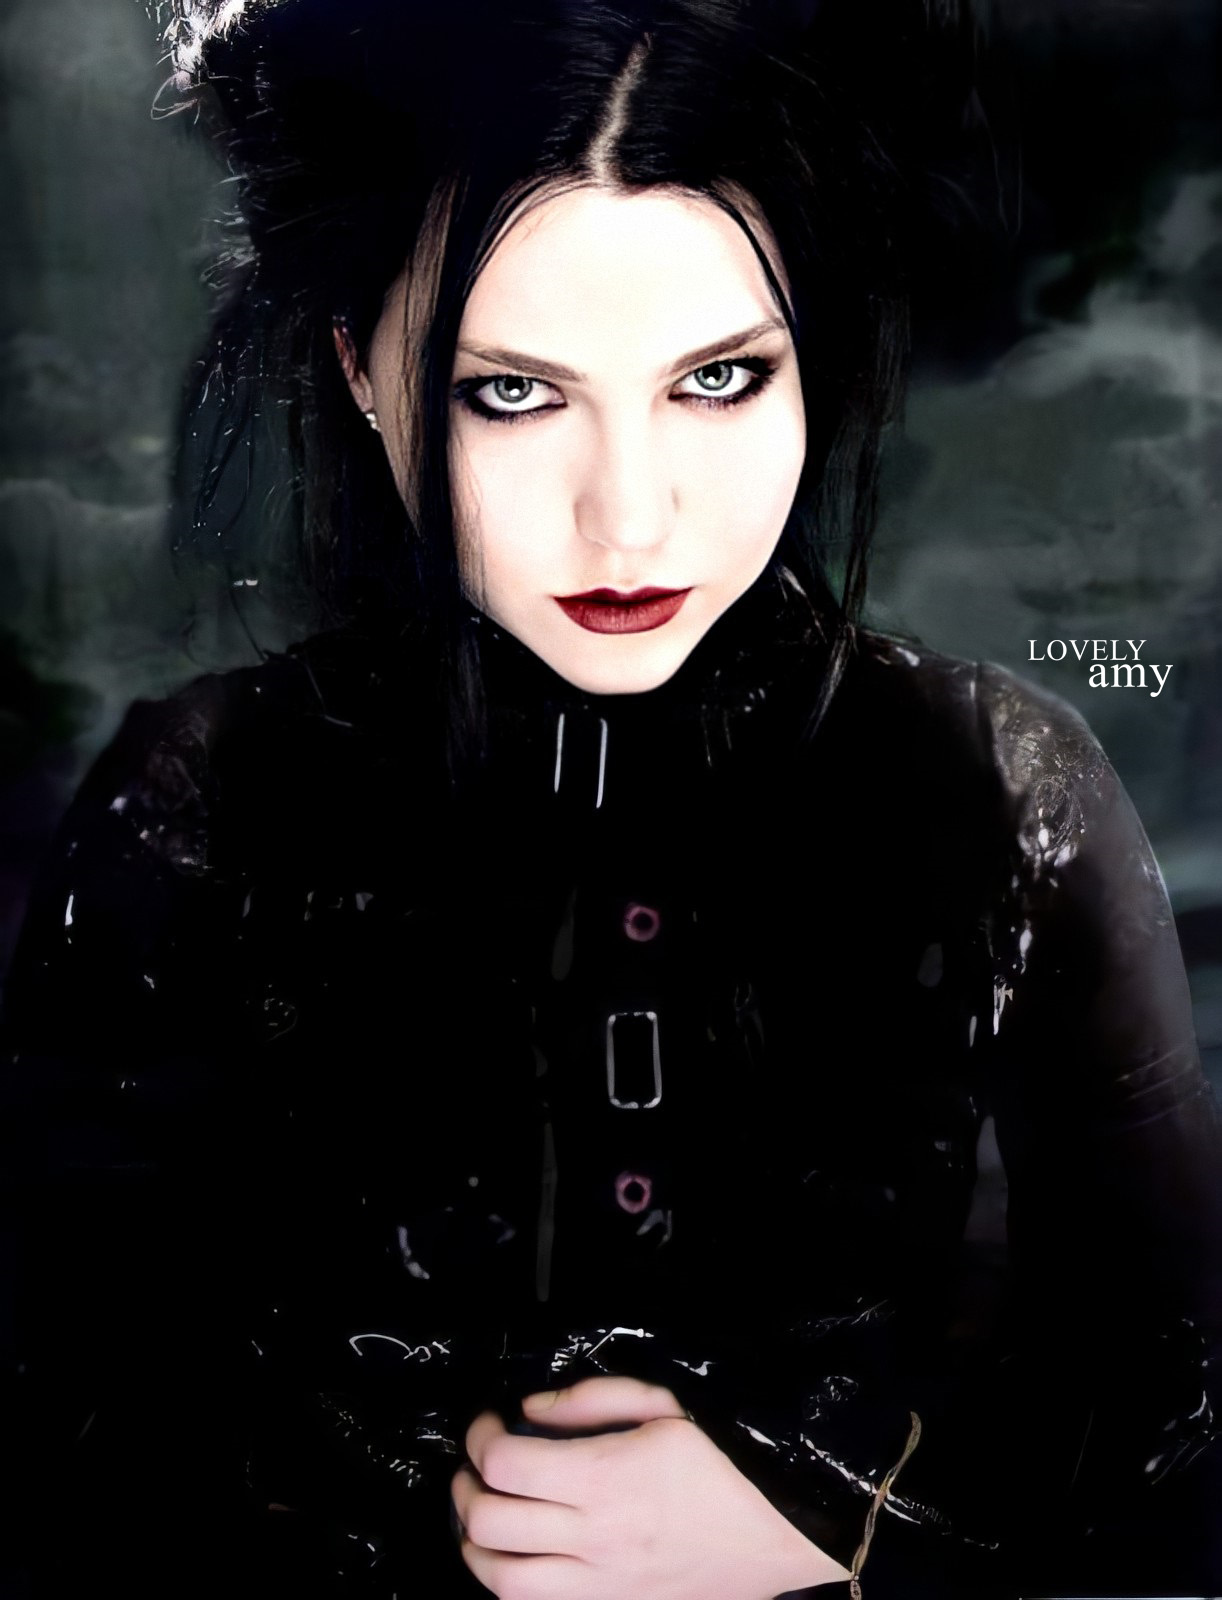 1222x1600
Keywords: amy lee;photoshoot;the open door;black and white;butterfly